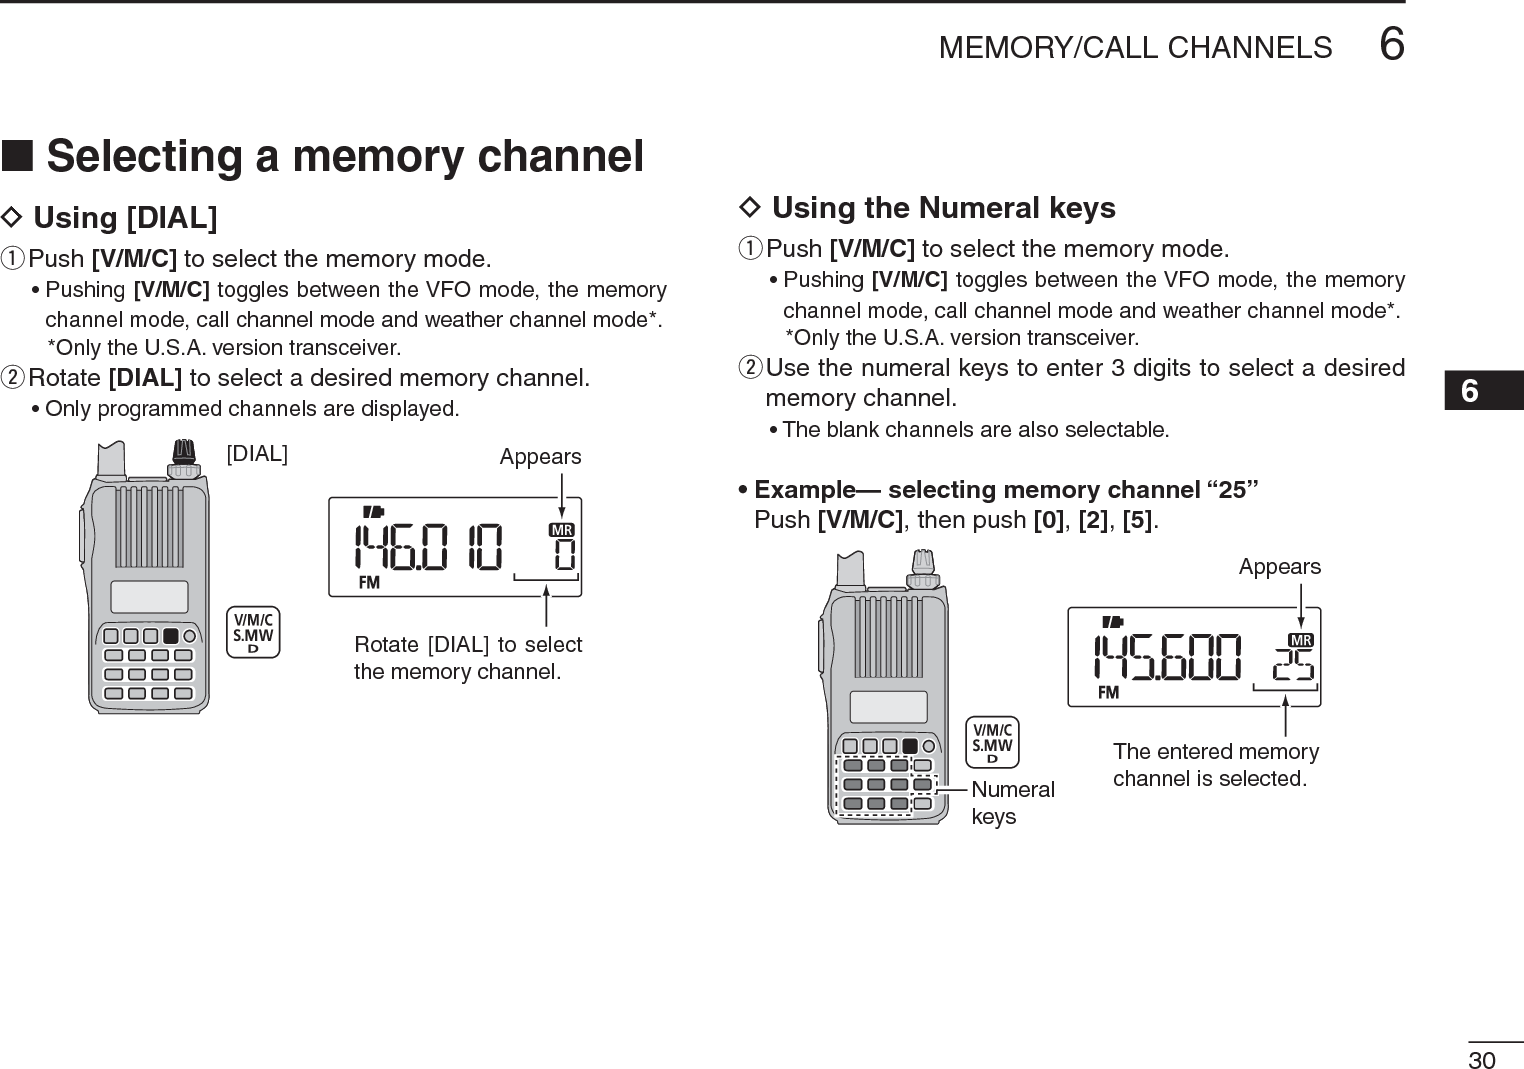 306MEMORY/CALL CHANNELS12345678910111213141516171819N Selecting a memory channelD Using [DIAL]q  Push [V/M/C] to select the memory mode.• Pushing [V/M/C] toggles between the VFO mode, the memory channel mode, call channel mode and weather channel mode*.*Only the U.S.A. version transceiver.w  Rotate [DIAL] to select a desired memory channel.• Only programmed channels are displayed.[DIAL] AppearsRotate [DIAL] to selectthe memory channel.D Using the Numeral keysq  Push [V/M/C] to select the memory mode.• Pushing [V/M/C] toggles between the VFO mode, the memory channel mode, call channel mode and weather channel mode*.*Only the U.S.A. version transceiver.w  Use the numeral keys to enter 3 digits to select a desired memory channel.• The blank channels are also selectable.• Example— selecting memory channel “25”Push [V/M/C], then push [0],[2],[5].AppearsNumeralkeysThe entered memorychannel is selected.